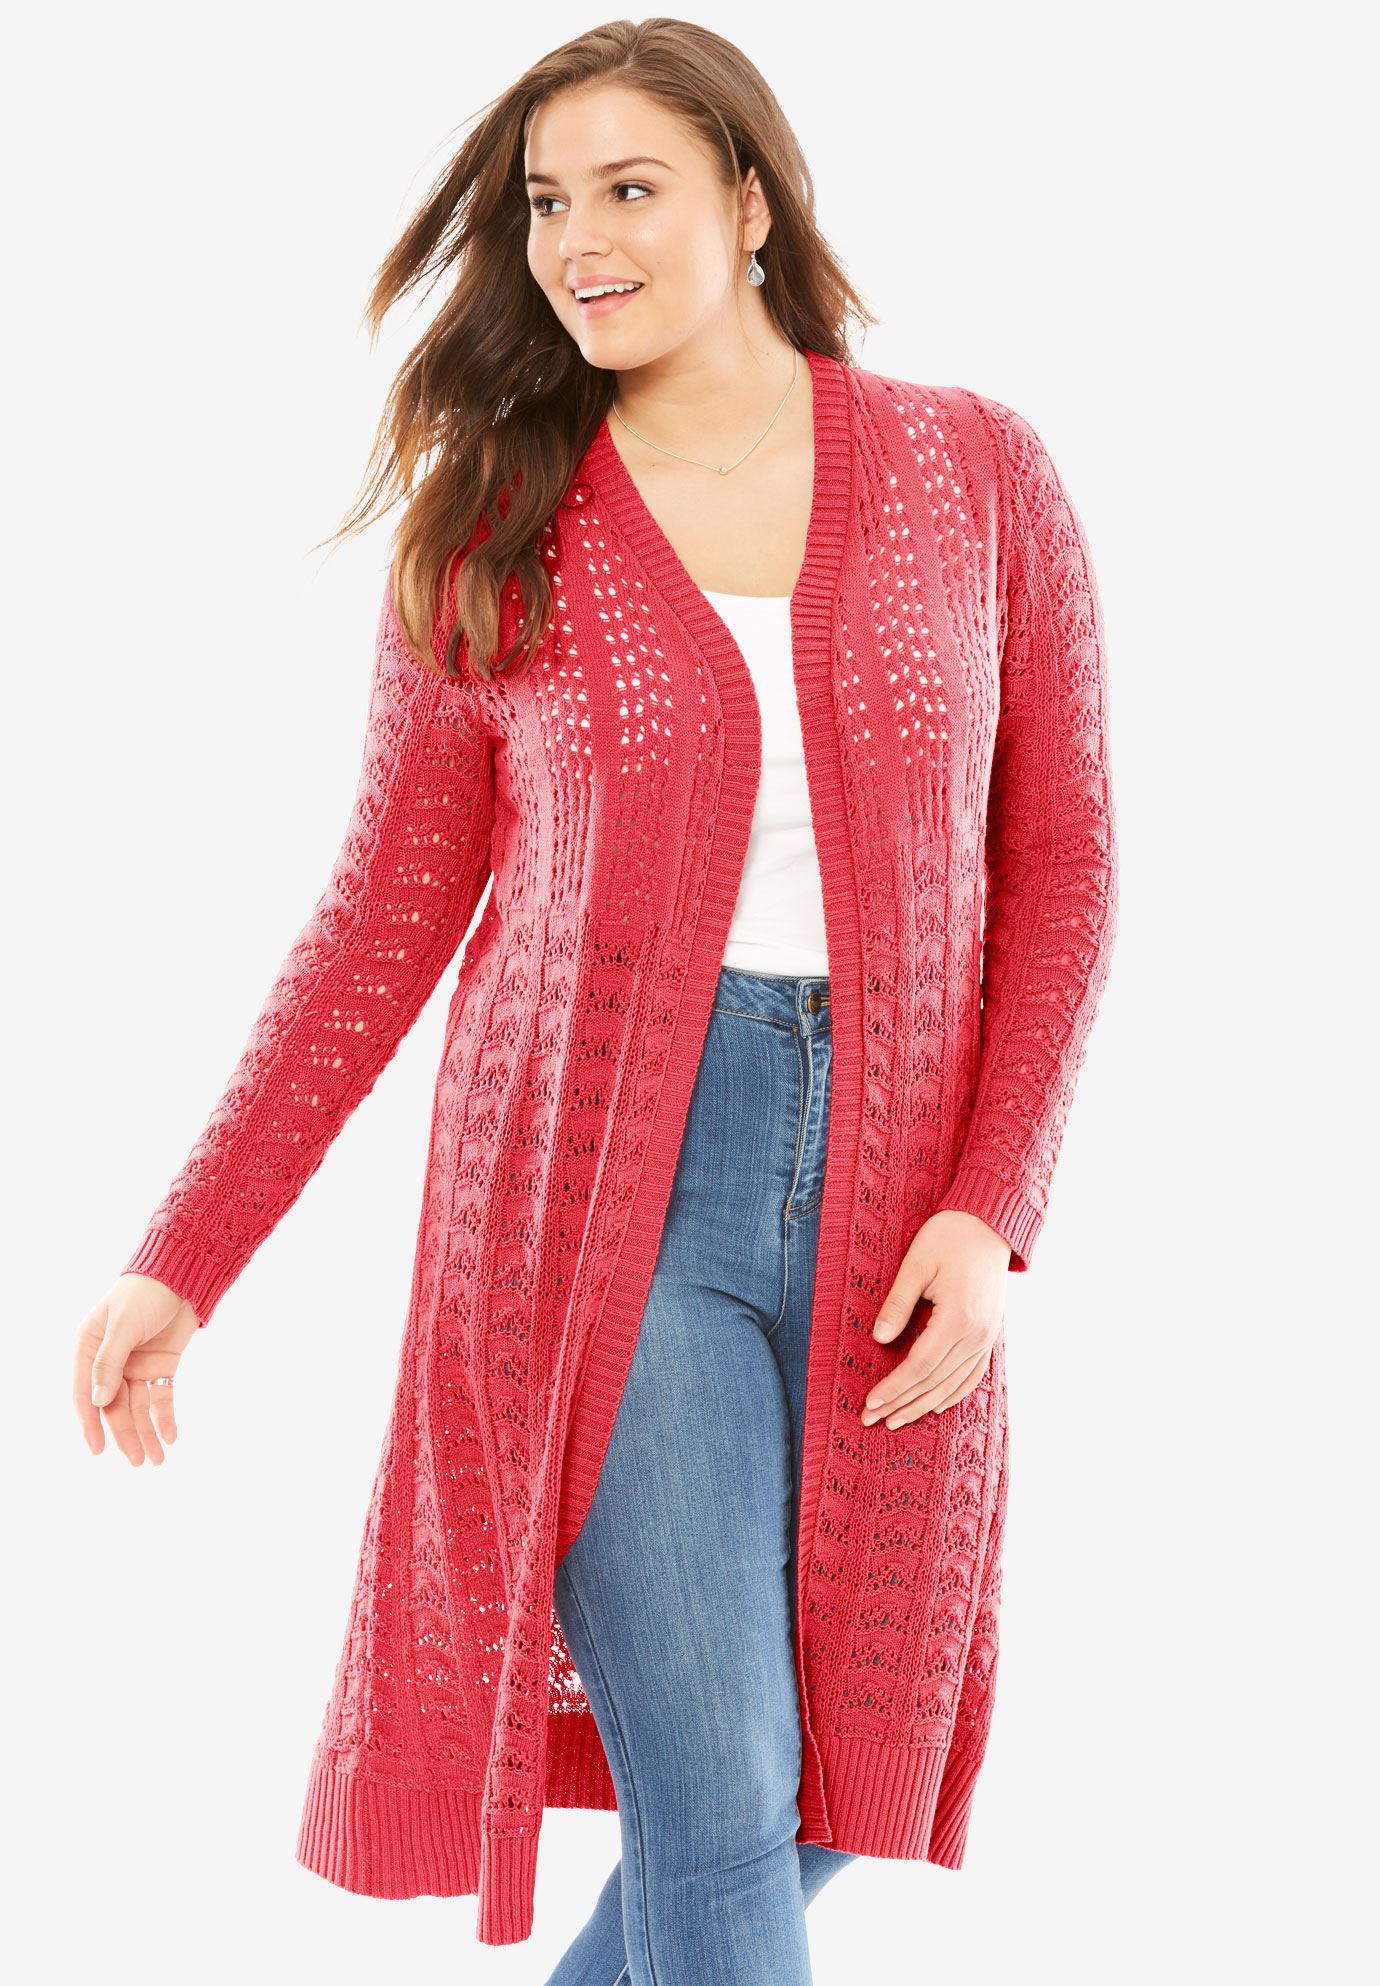 Pointelle cardigan sweater duster | Plus Size Sweaters | Woman Within